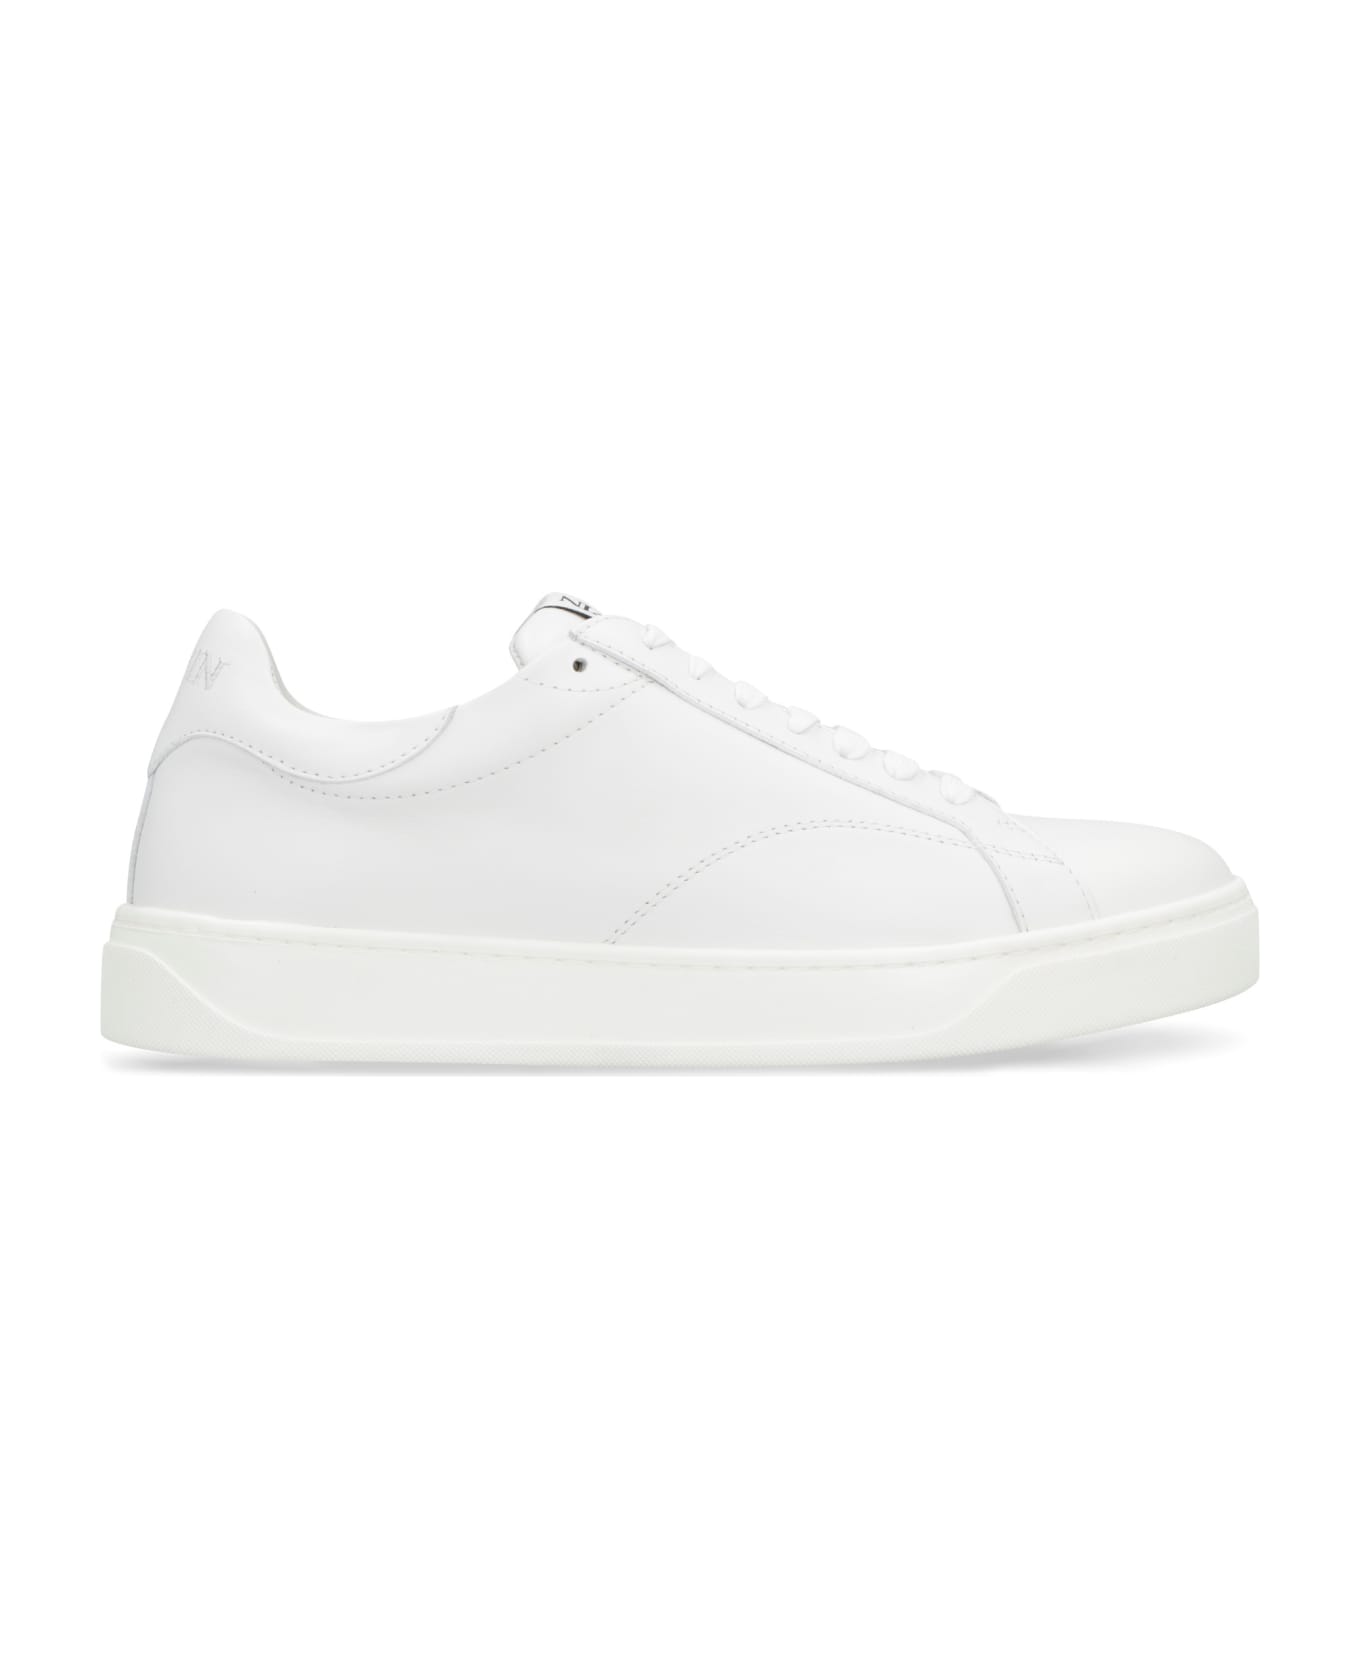 Lanvin Ddb0 Leather Low-top Sneakers - White